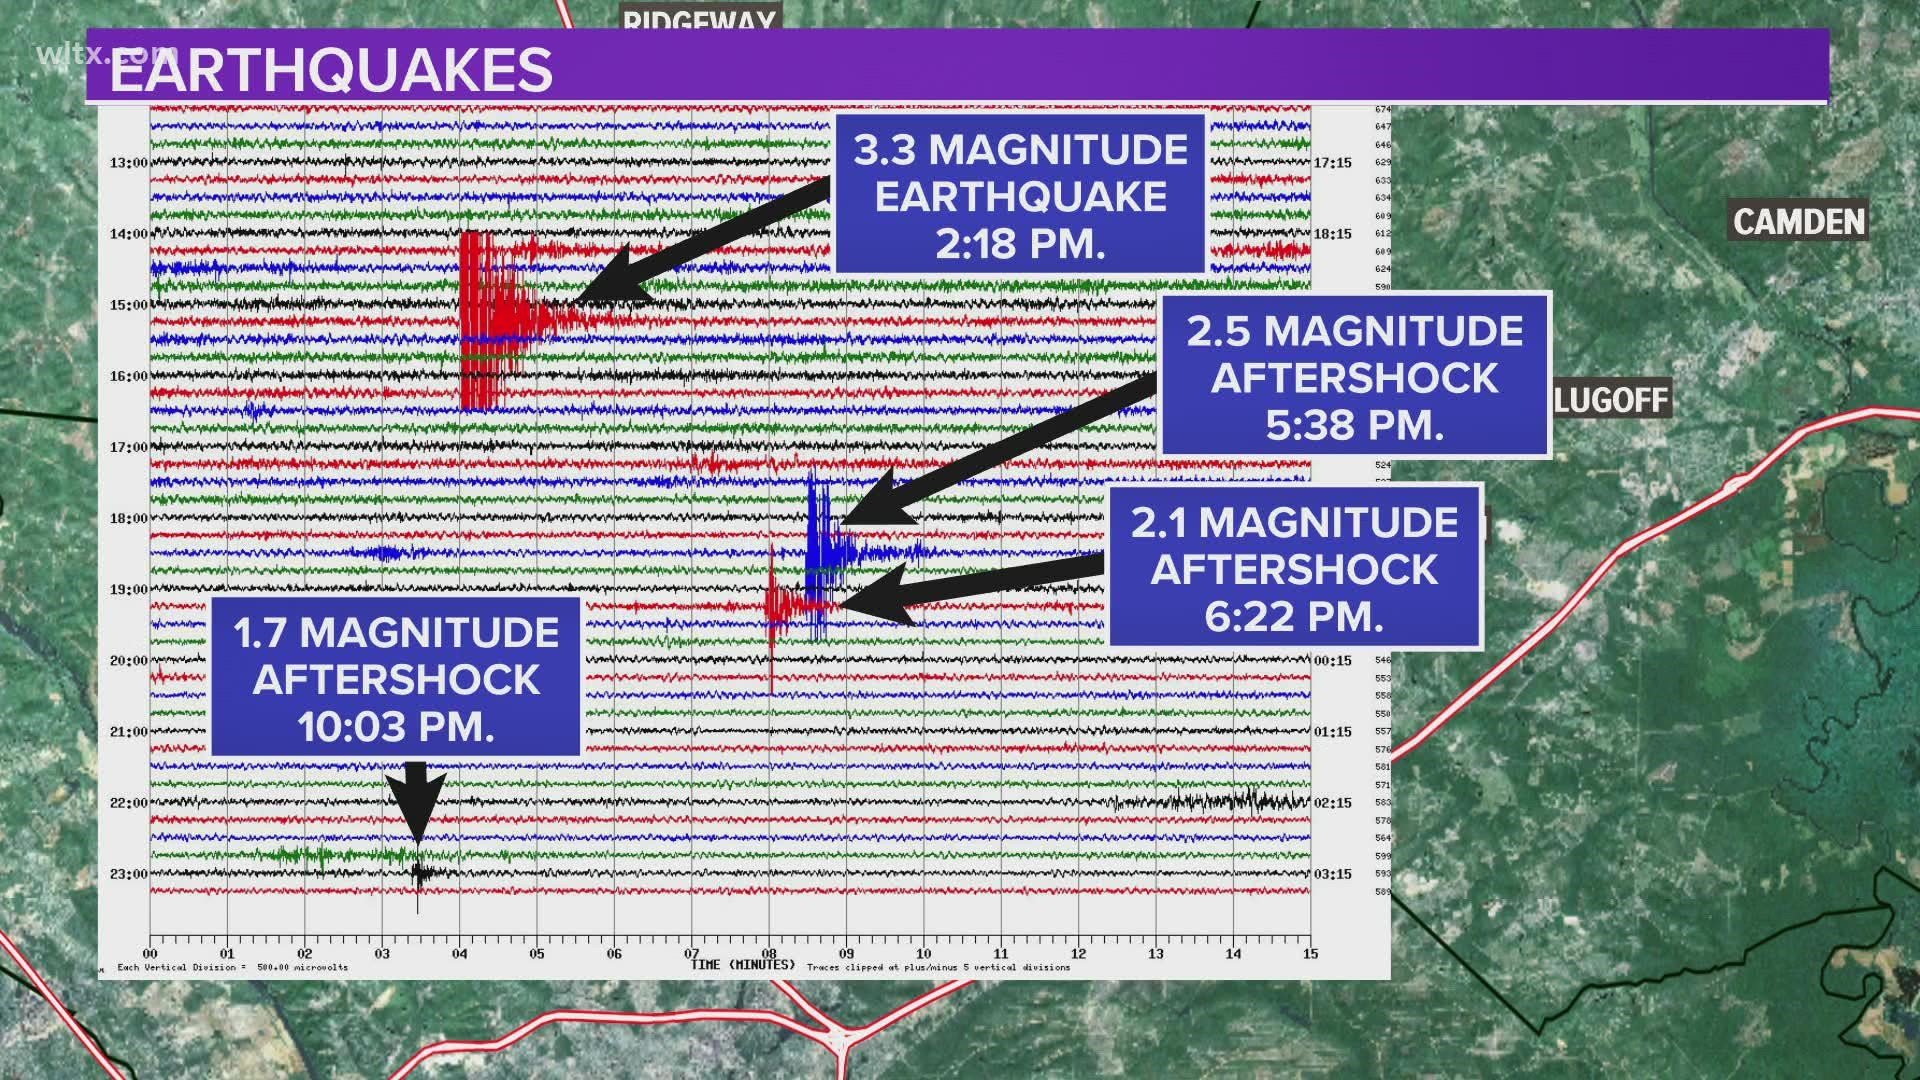 United States Geological Survey confirmed an a 3.3 magnitude earthquake shook the Columbia area Monday afternoon, followed by three aftershocks.